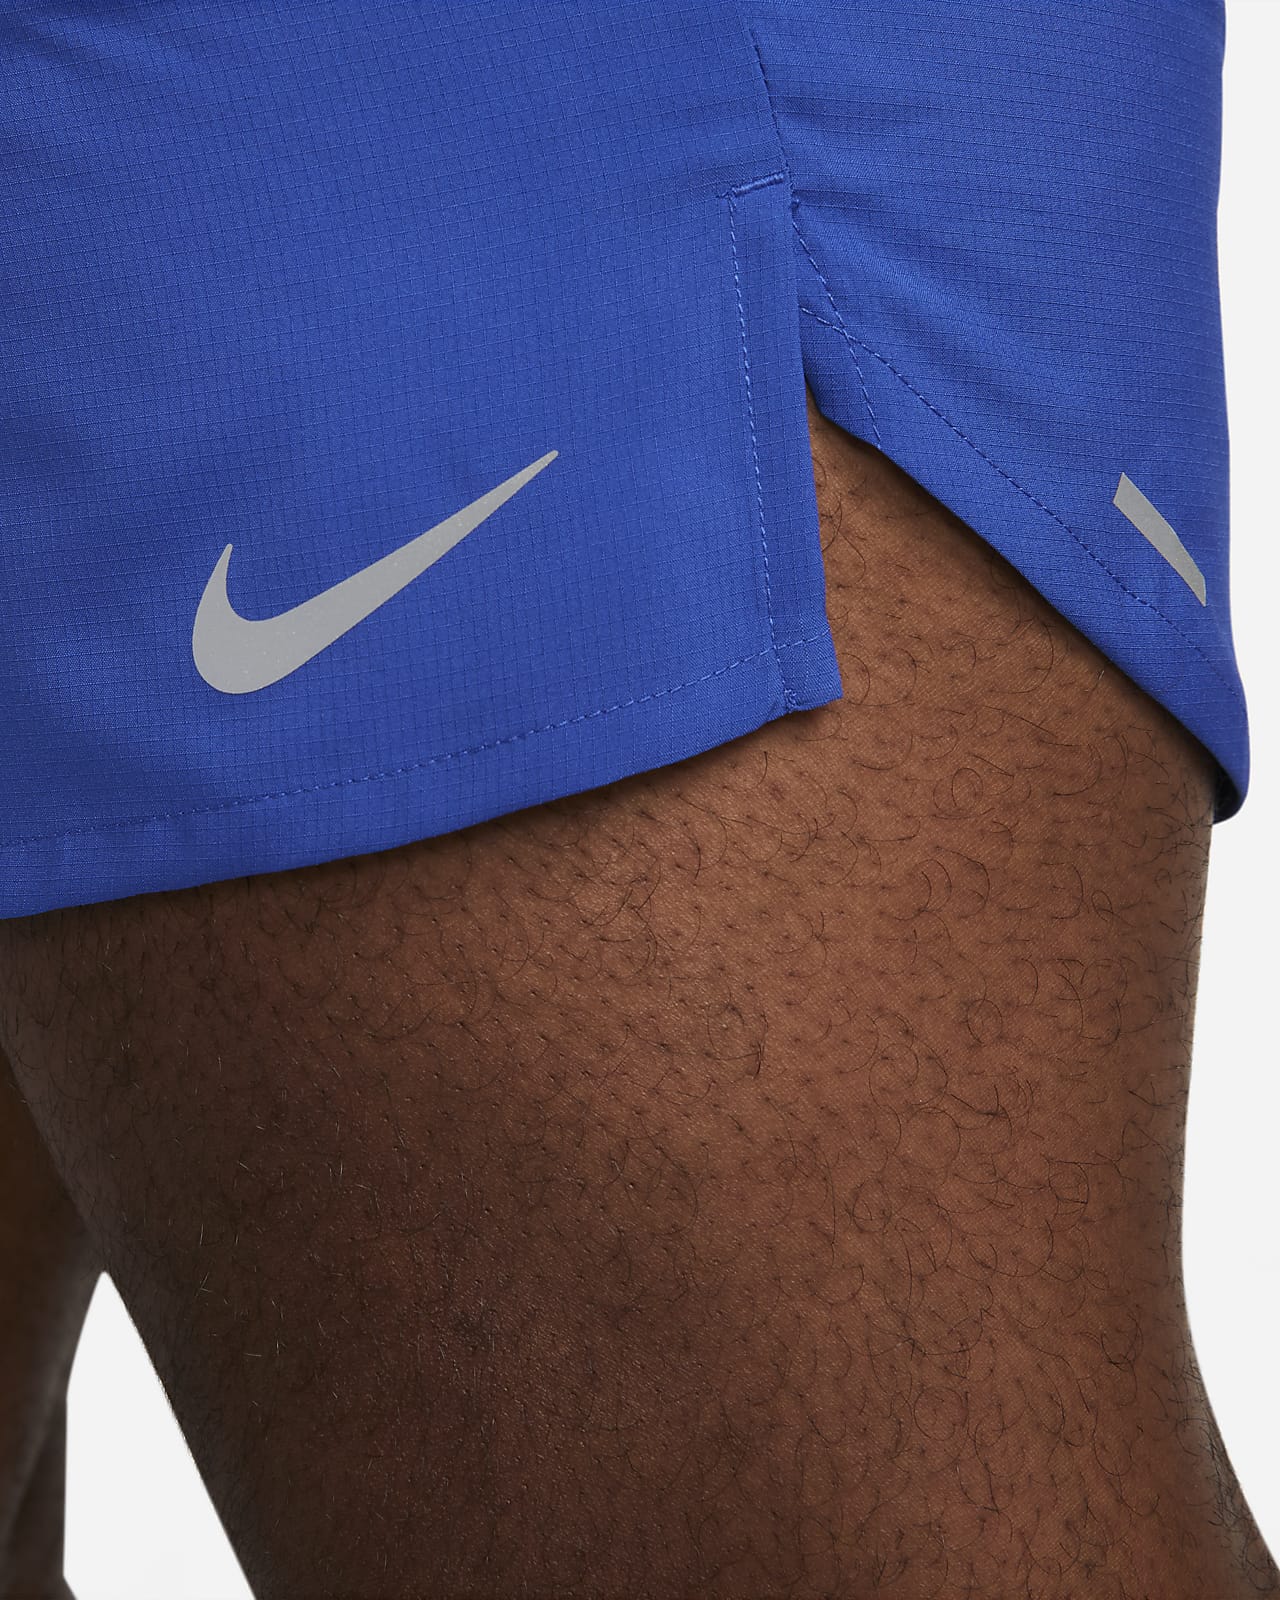 Nike Stride Men's Dri-FIT 7 Brief-Lined Running Shorts.